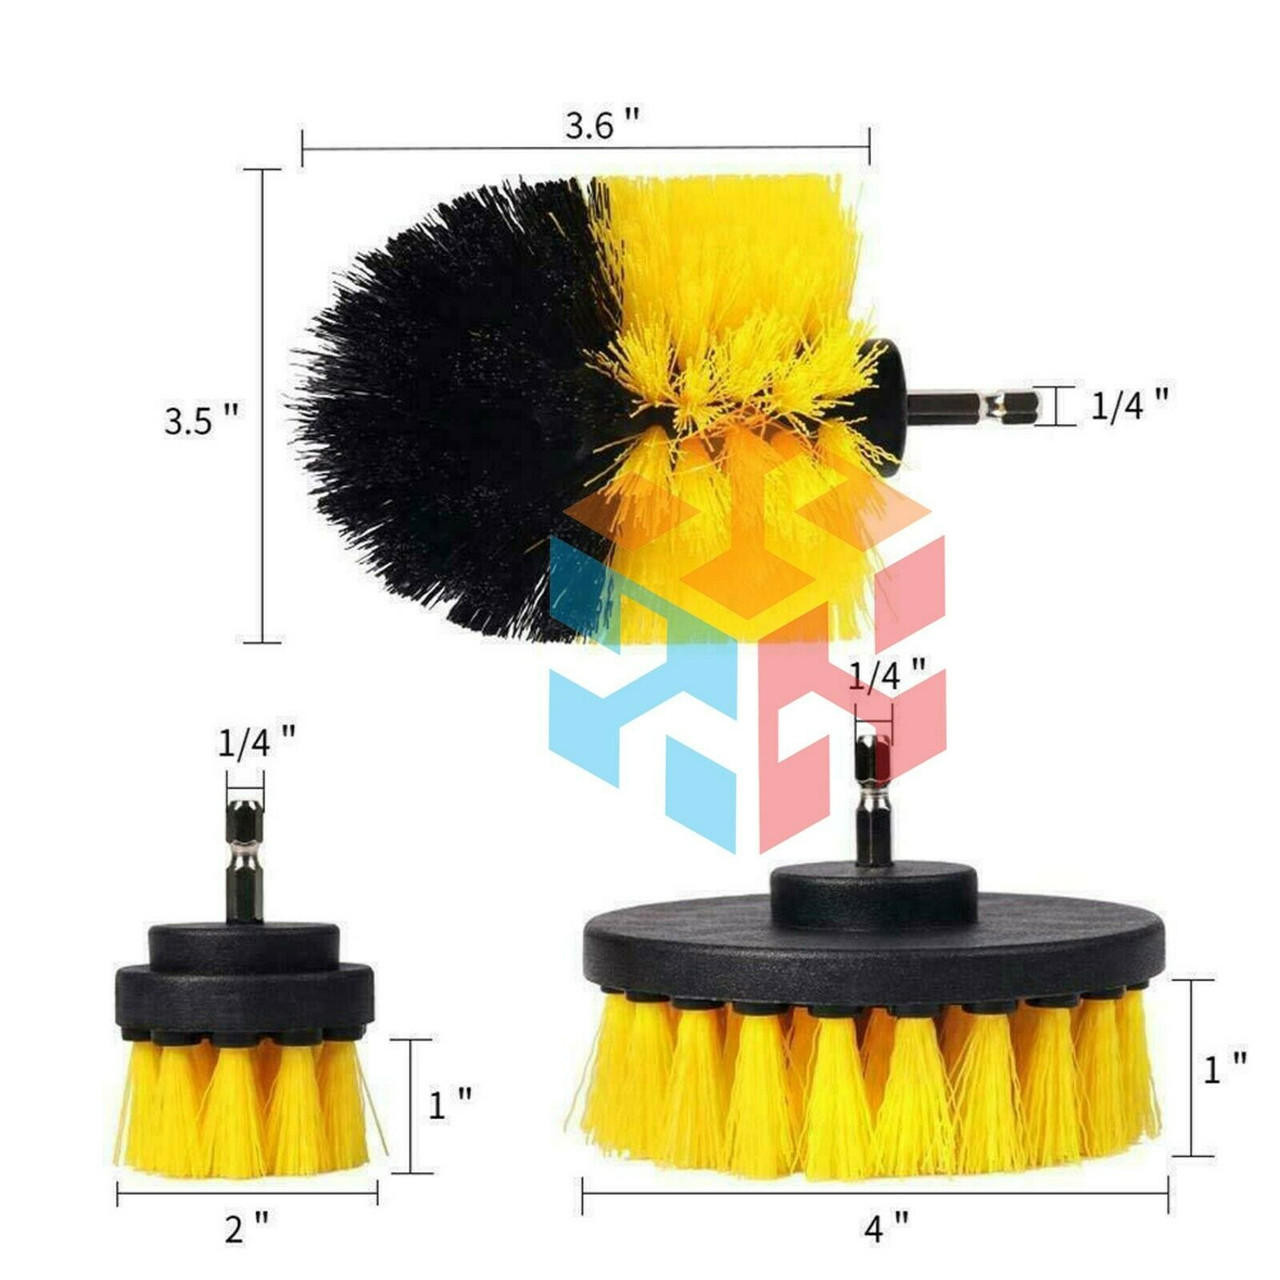 https://cdn11.bigcommerce.com/s-zrh8tkpr8d/images/stencil/1280x1280/products/10034/31751/drill-brushes-set-4pcs-tile-grout-power-scrubber-cleaner-spin-tub-shower-wall__34861.1665655920.jpg?c=2&imbypass=on